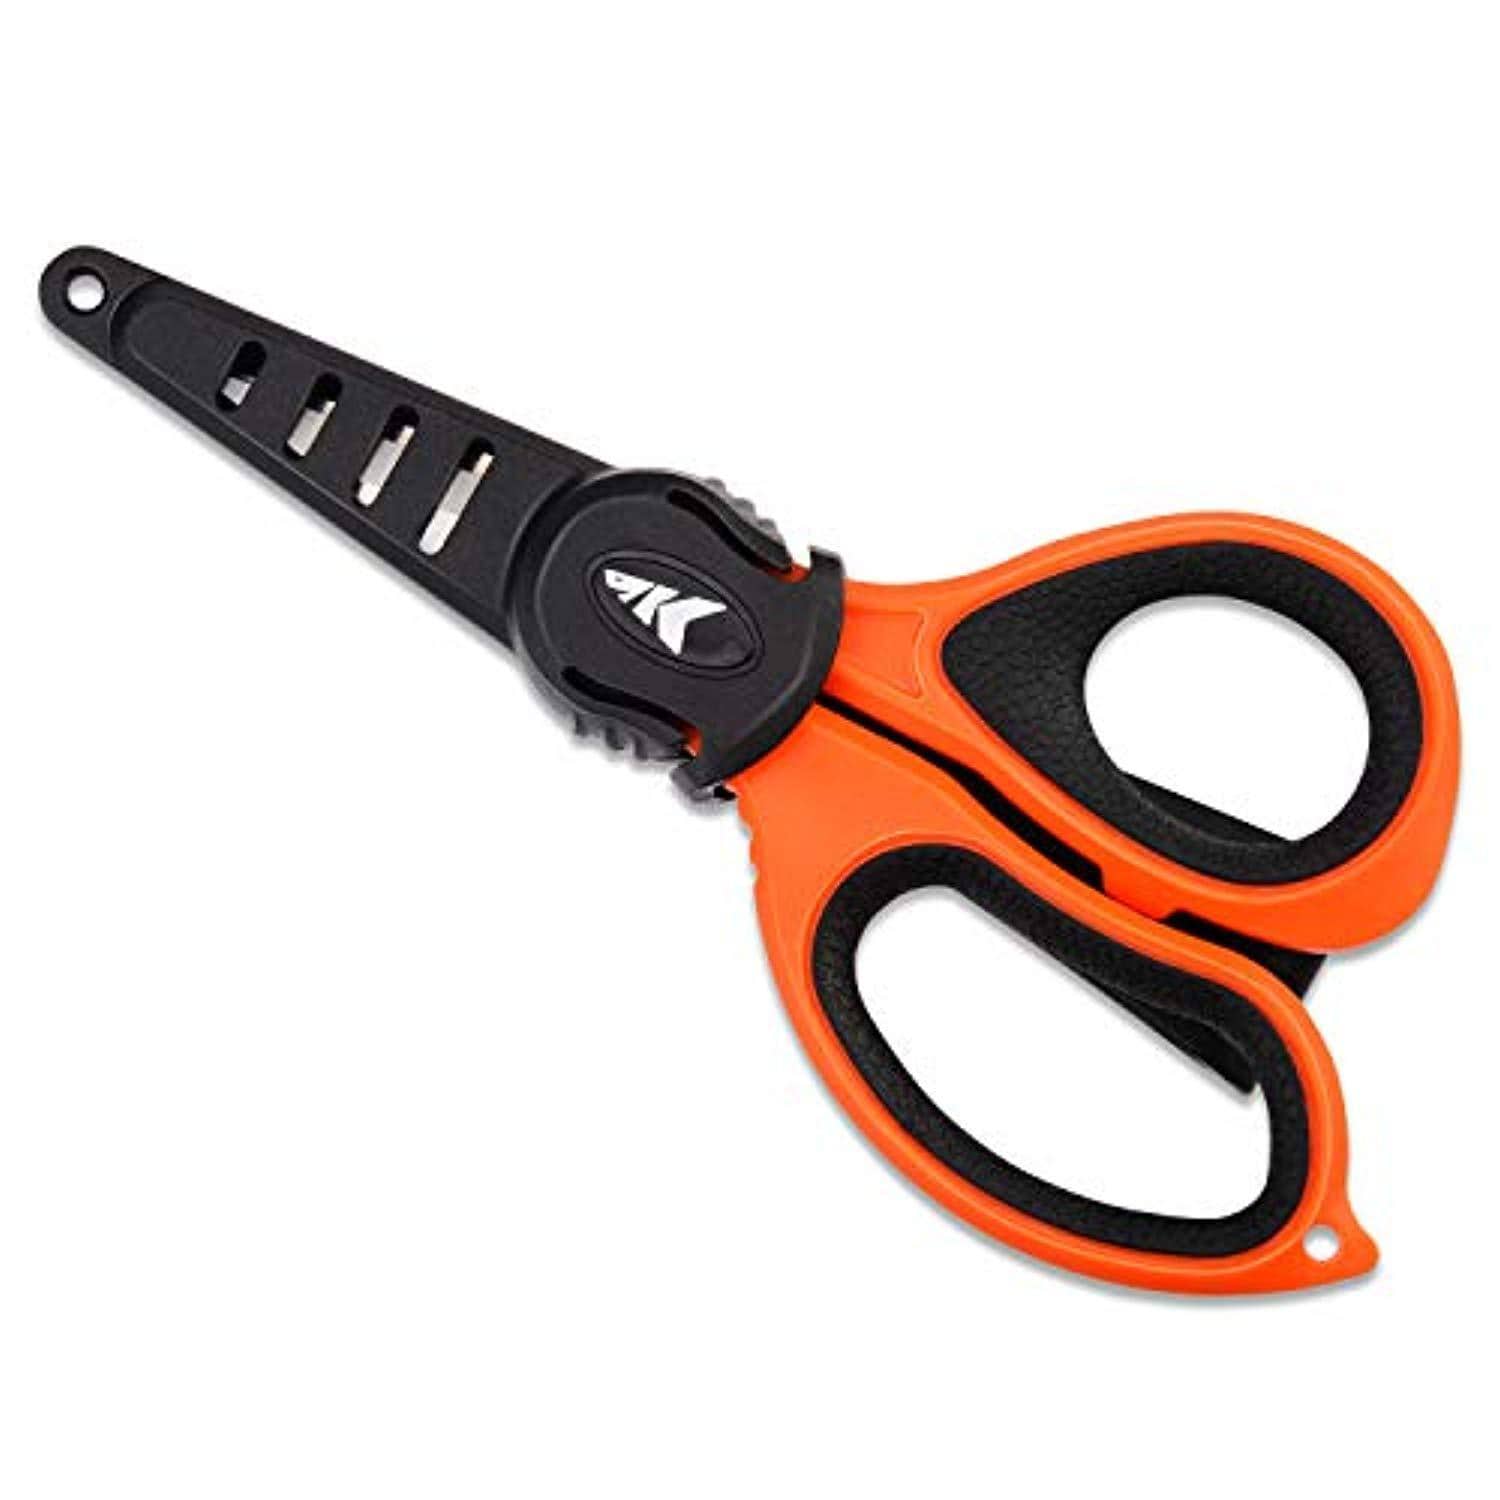 Stainless Fishing Scissors with PP Handle - China Fishing Scissors